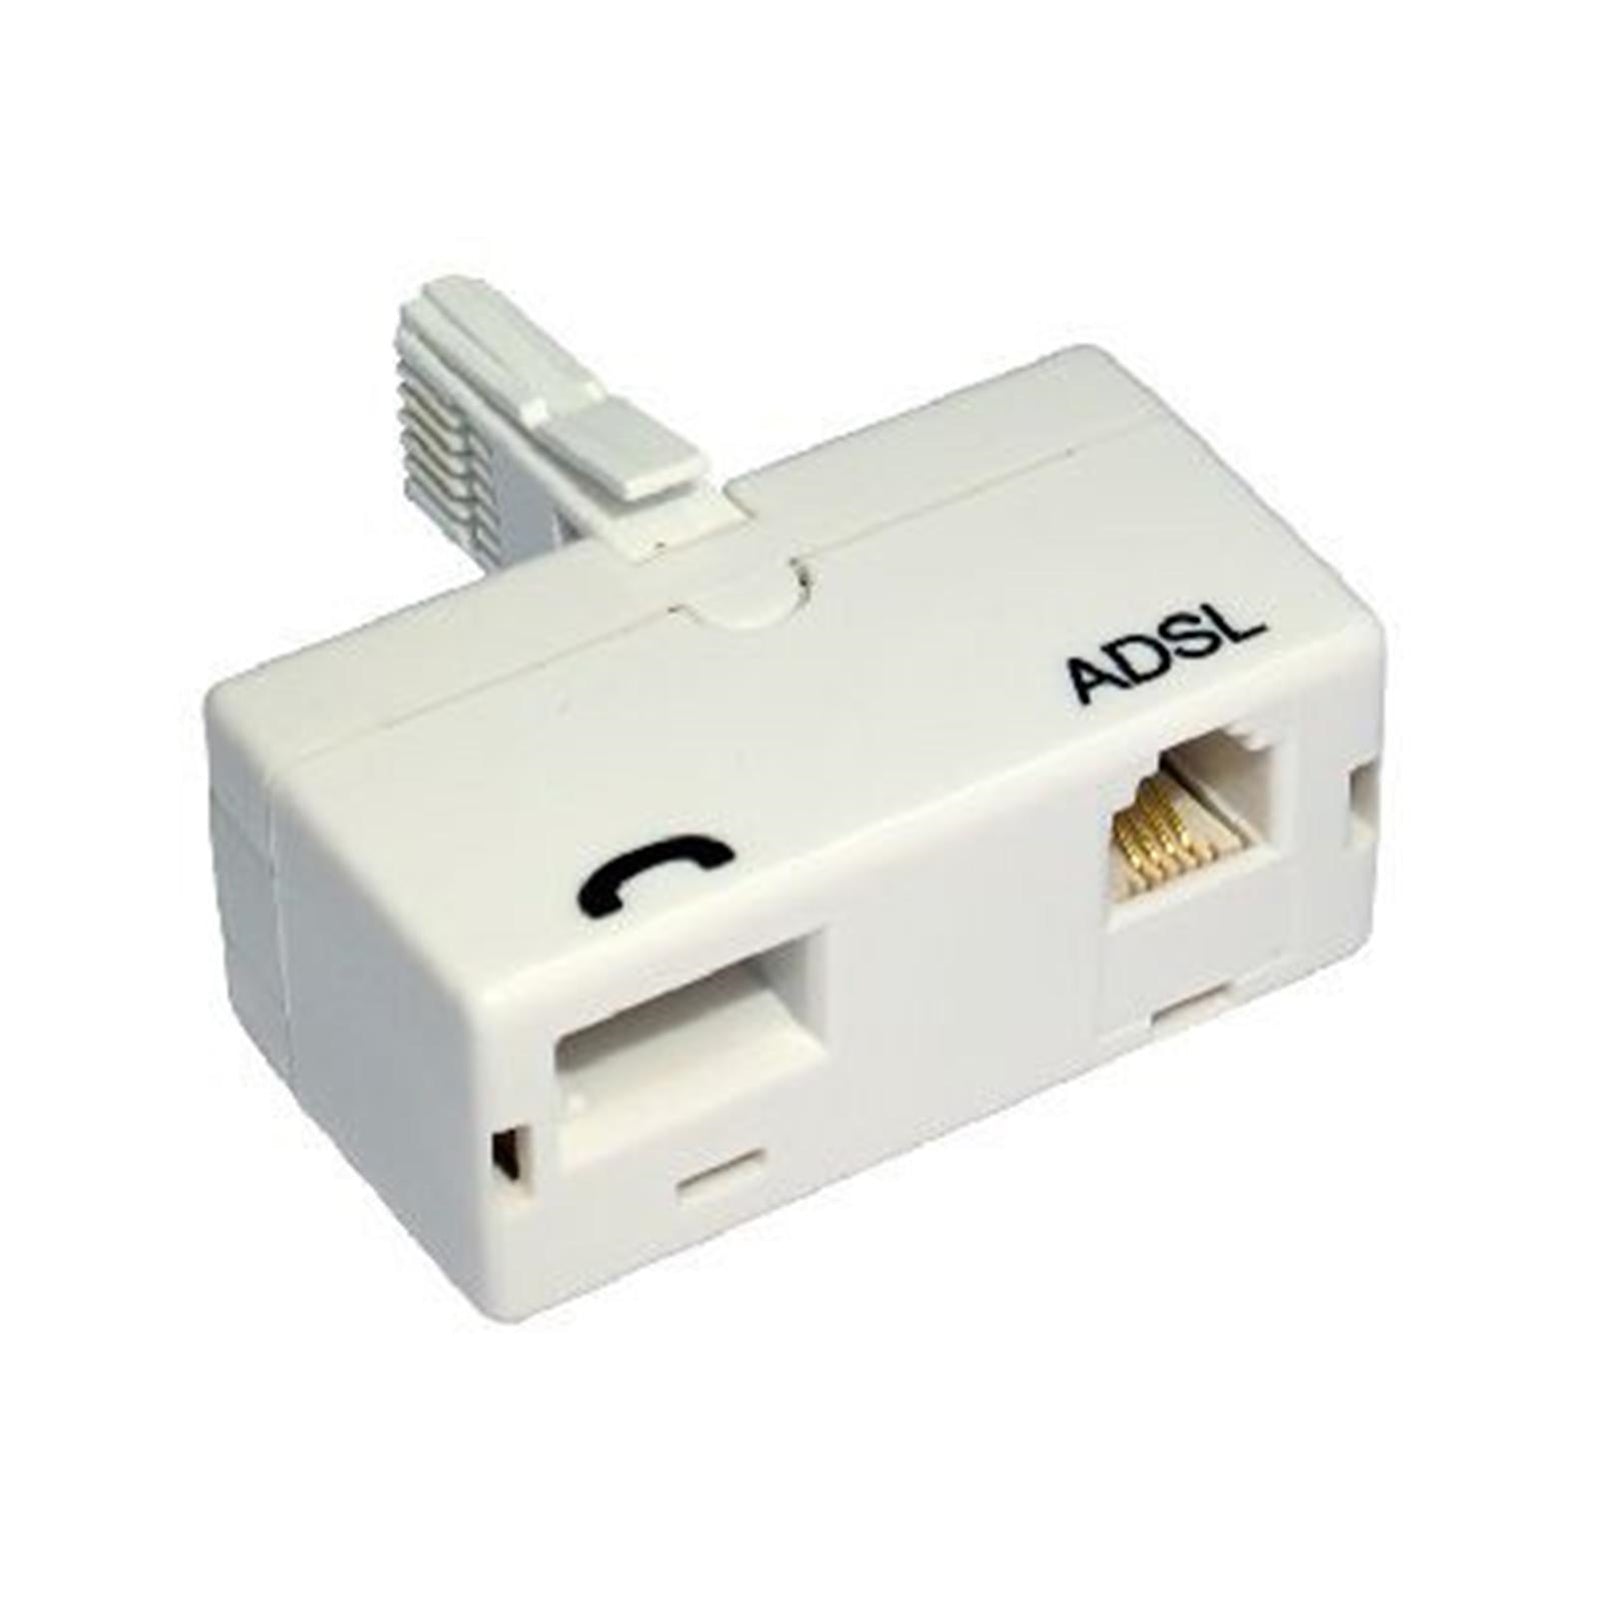 Photos - Cable (video, audio, USB) Target BT (M) to BT (F) and RJ11 (F) White OEM Direct Plug ADSL Micro Filt 